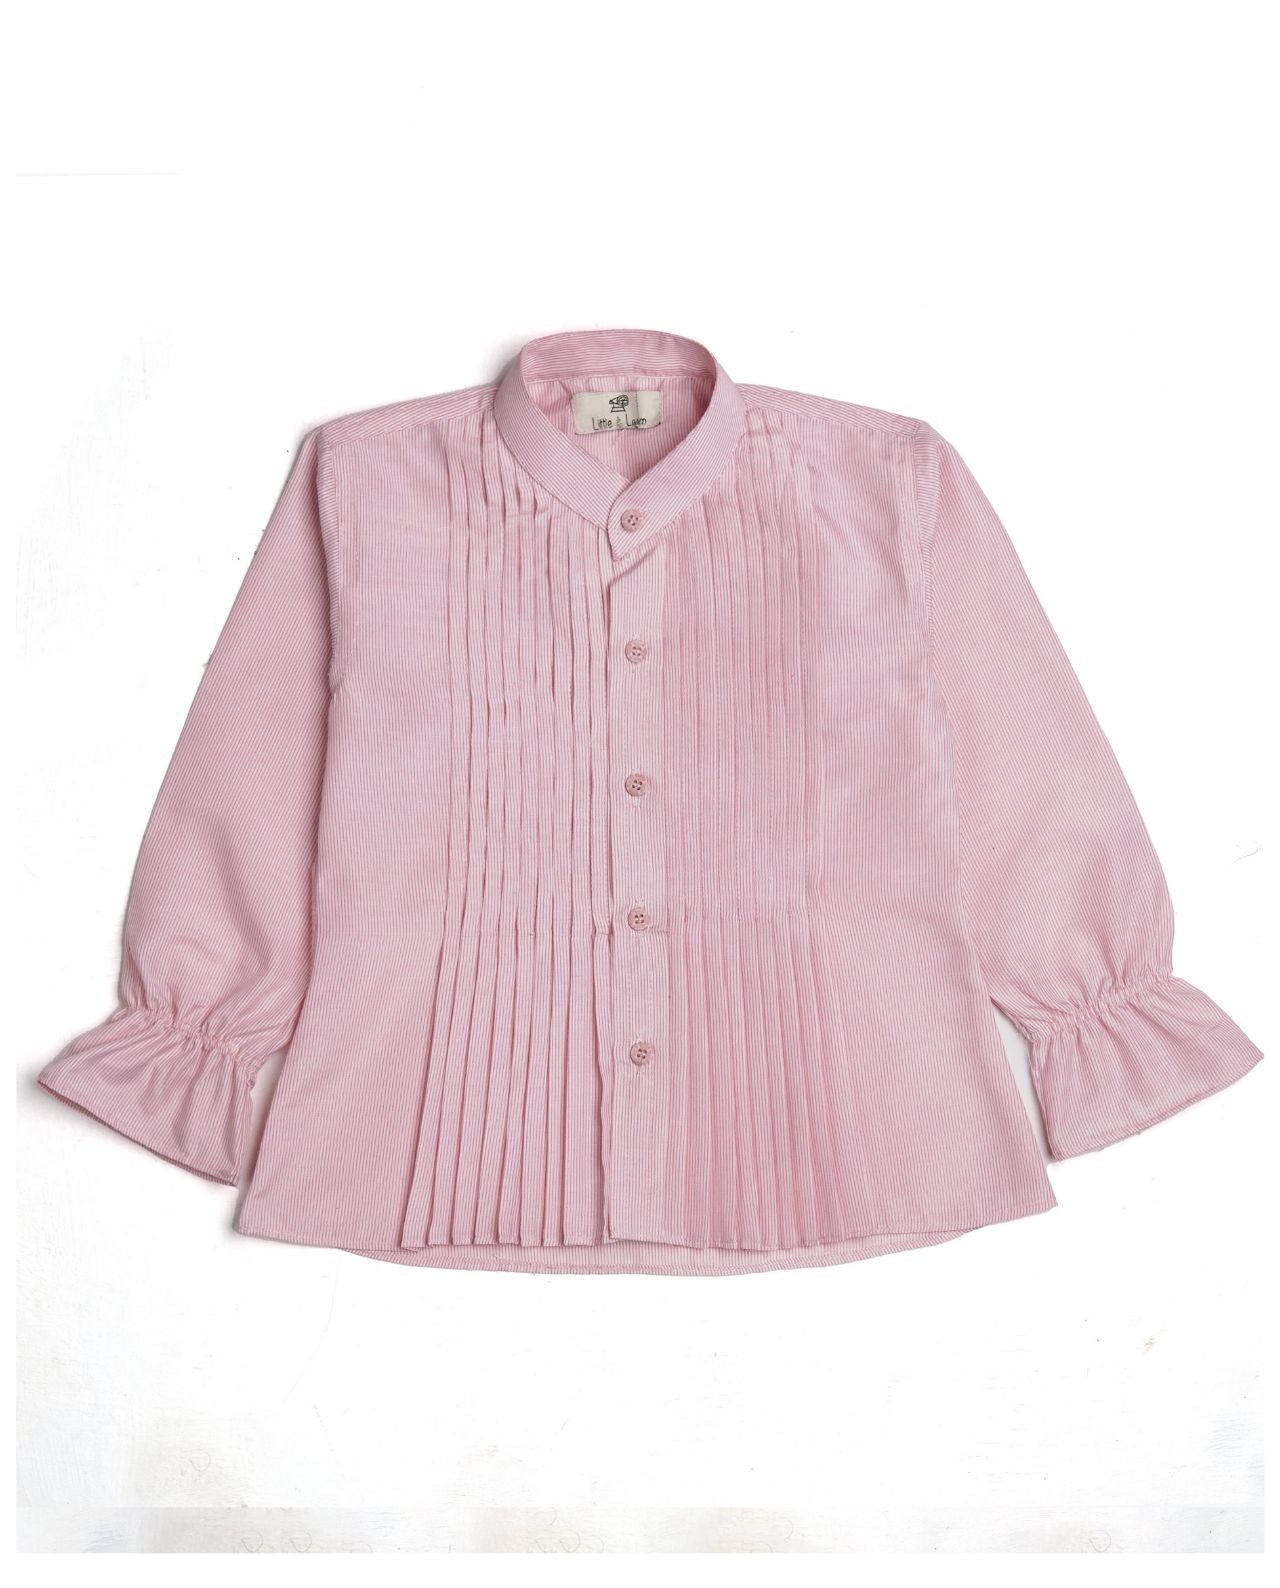 Pink pleated shirt